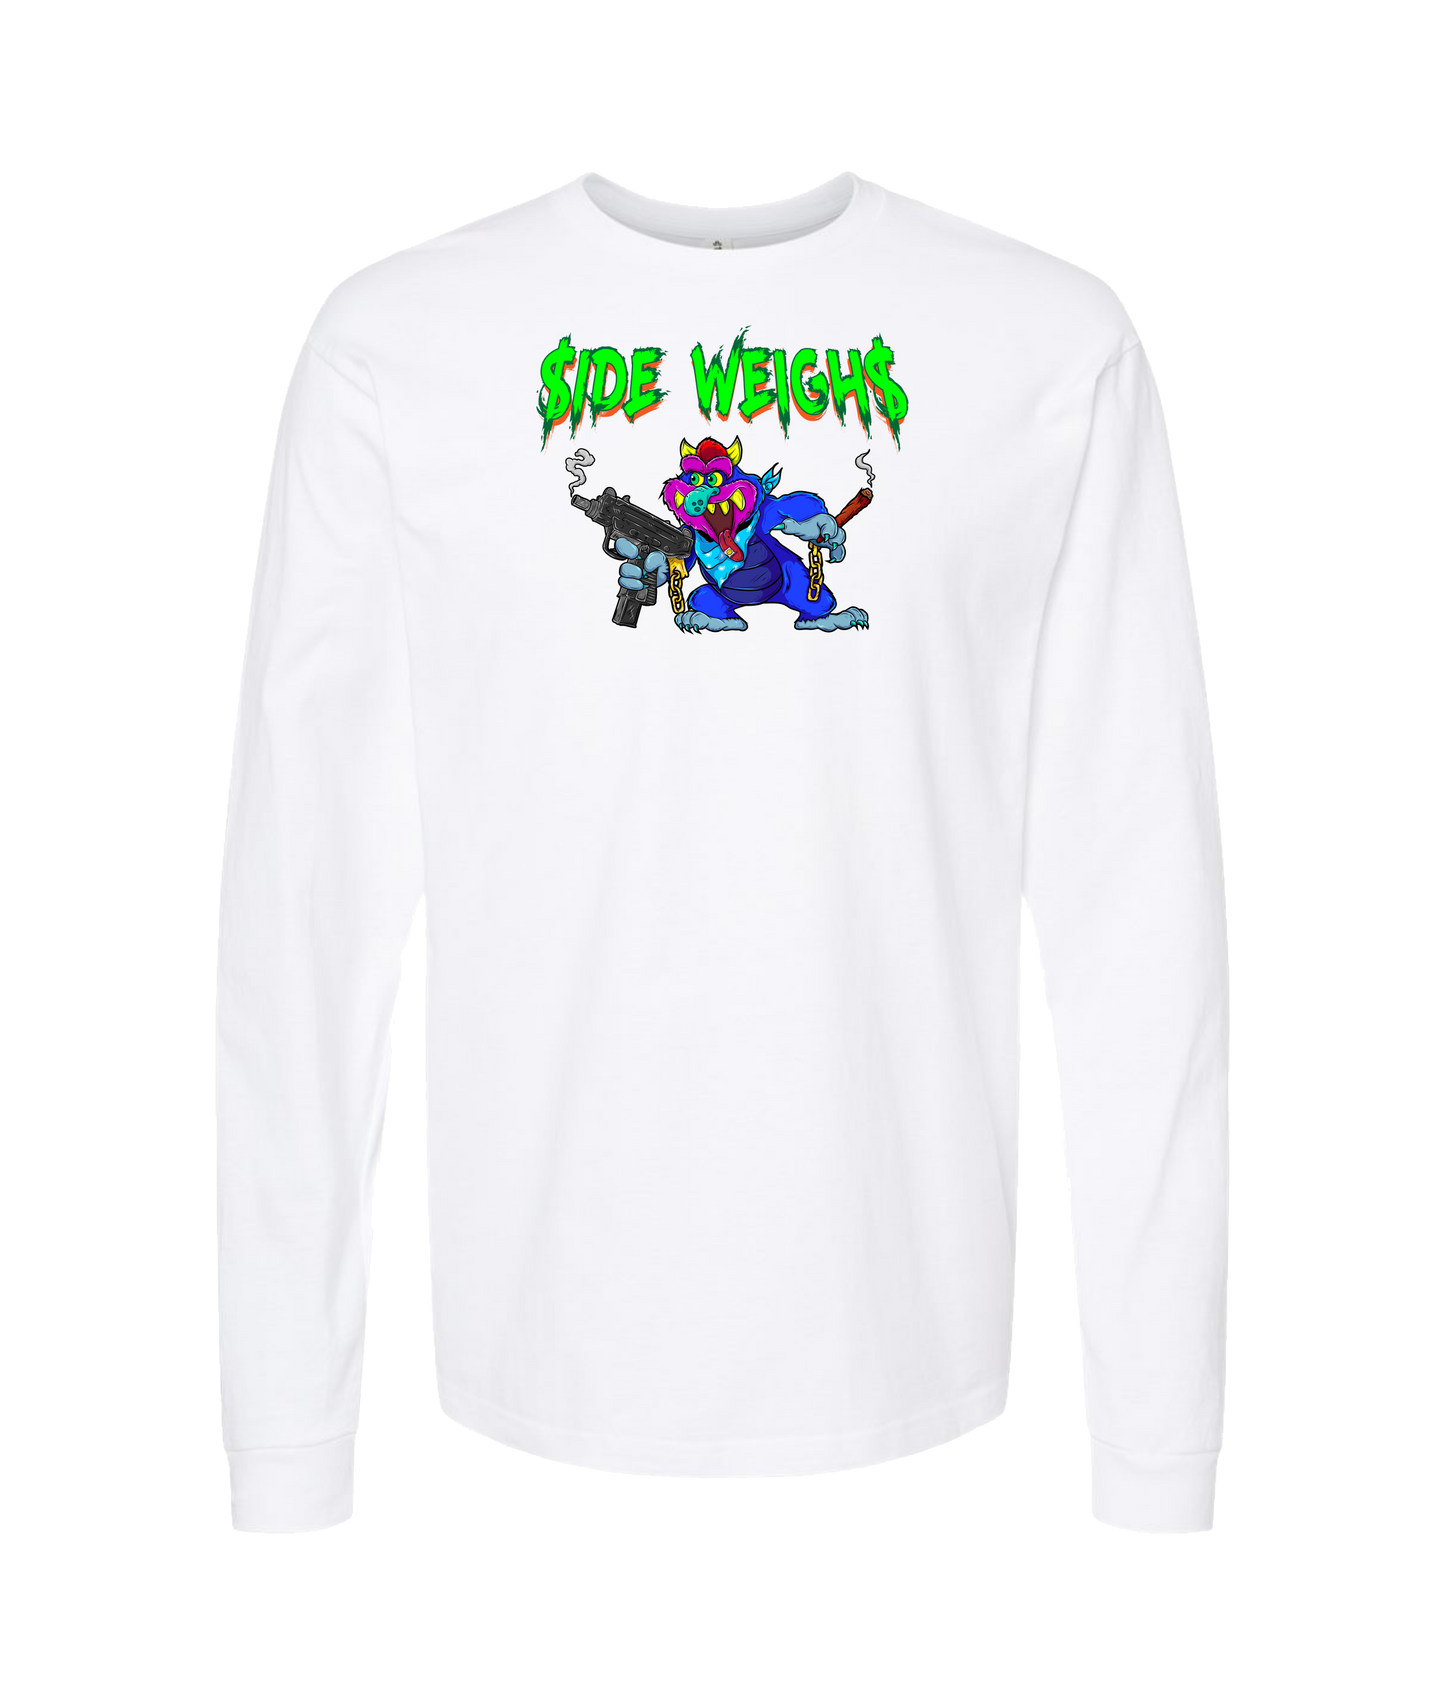 Side Weighs - Spitz - White Long Sleeve T